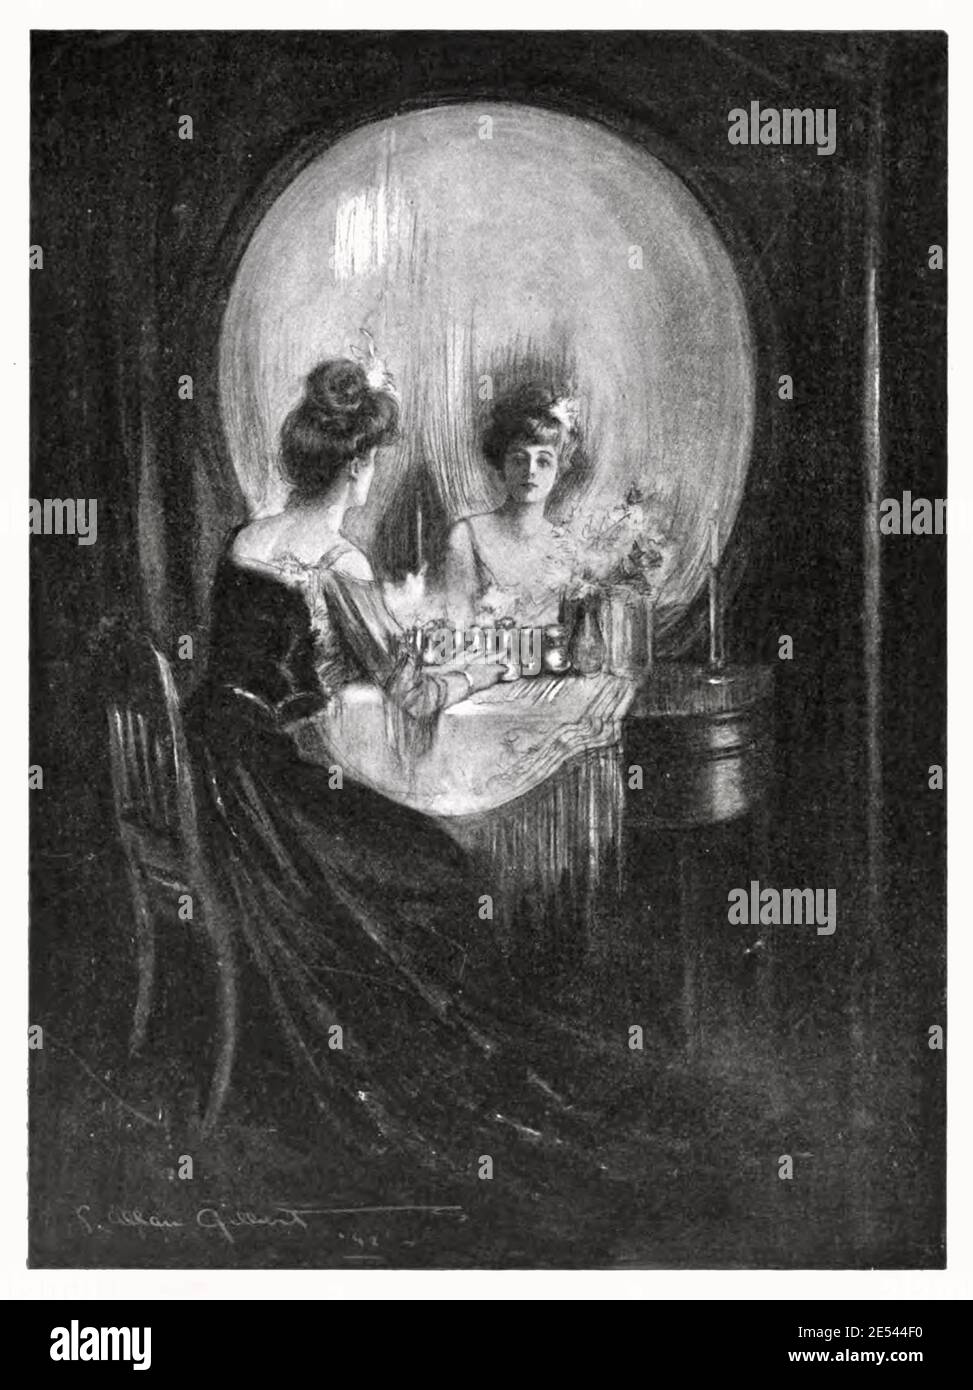 Two ladies of opulence take tea whilst the image of a skull reminds the observer that death lies in wait. All is Vanity by Charles Allan Gilbert. Stock Photo